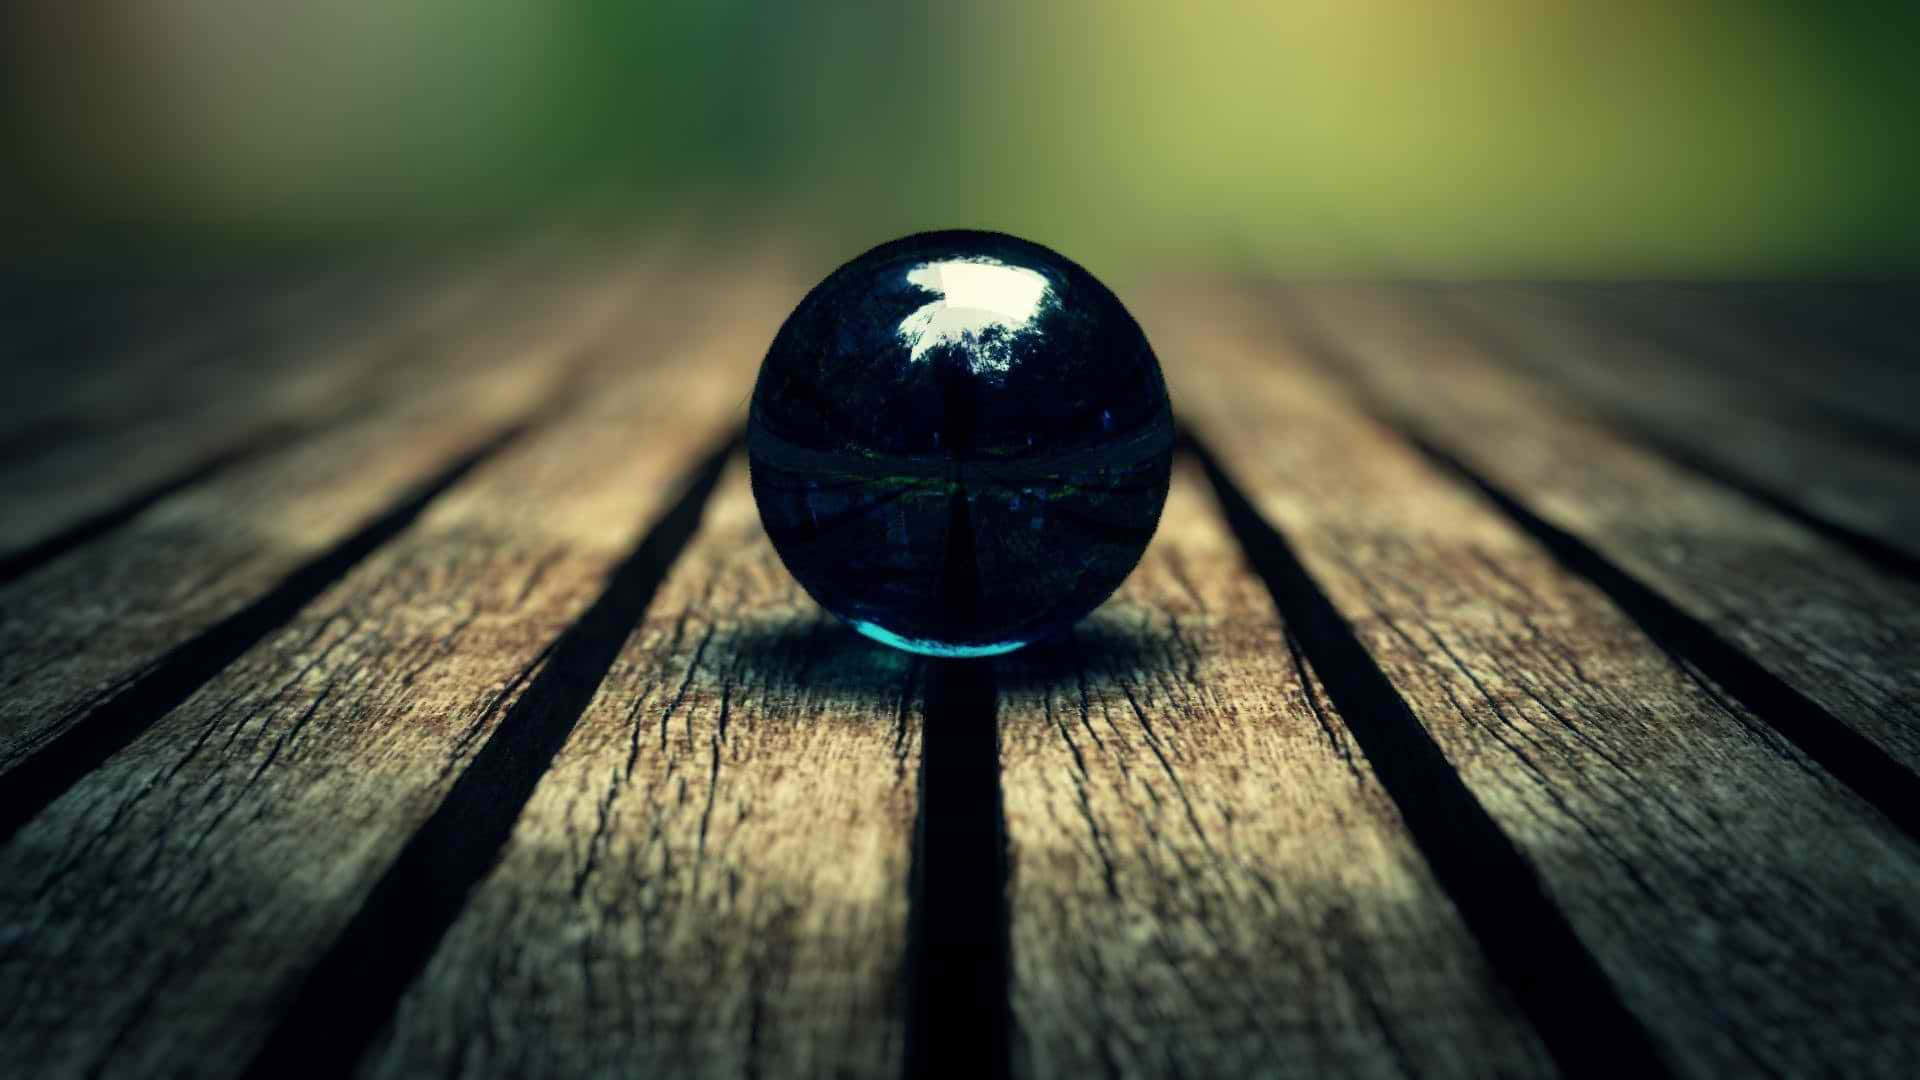 a black ball sitting on top of a wooden table Wallpaper